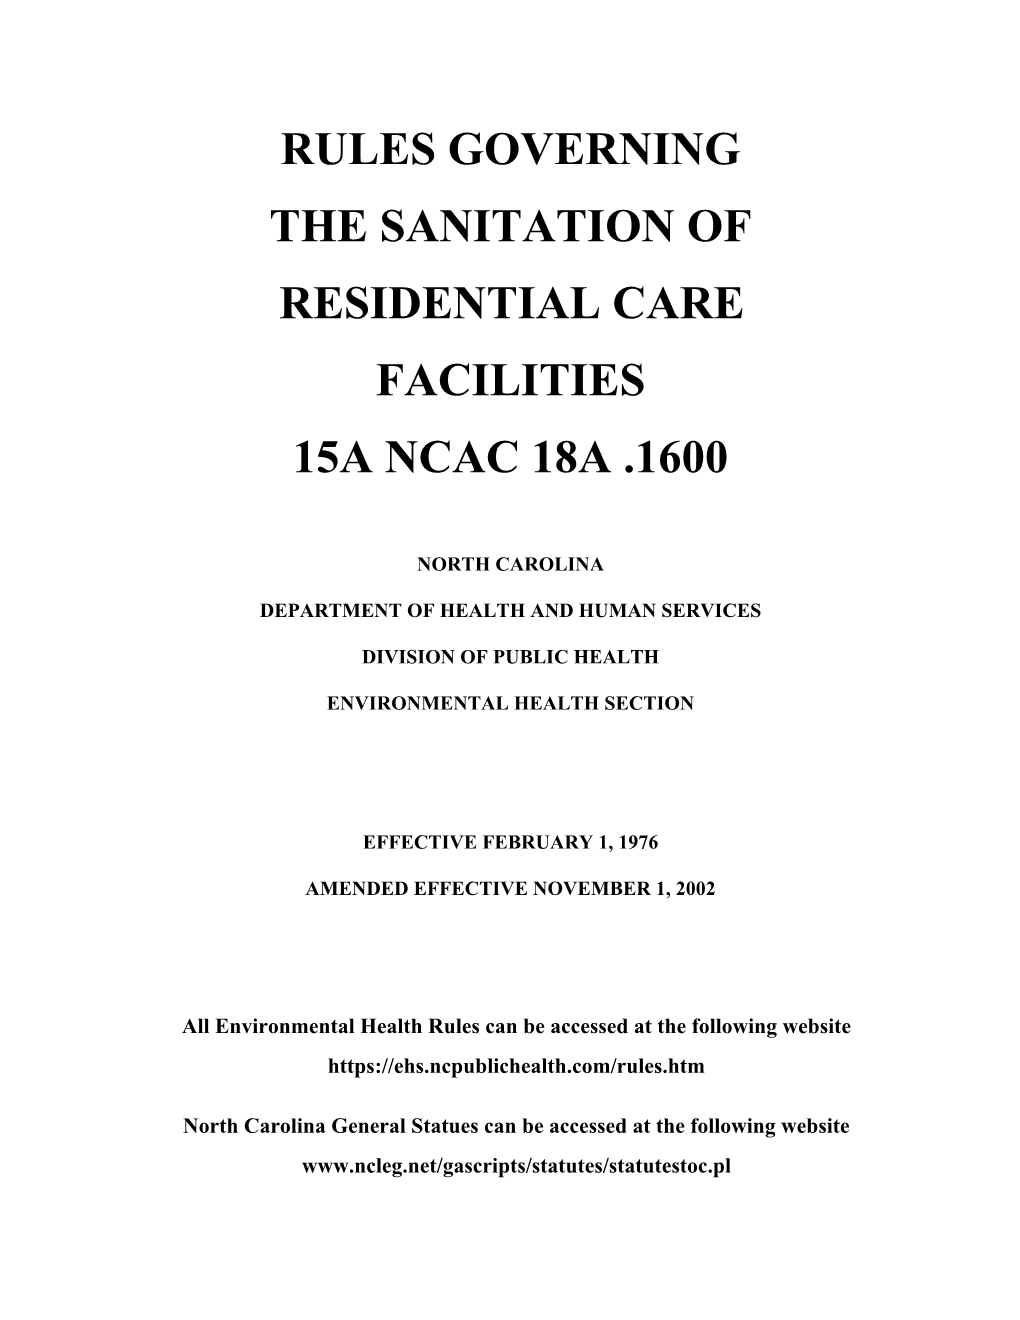 Rules Governing Sanitation of Residential Care Facilities